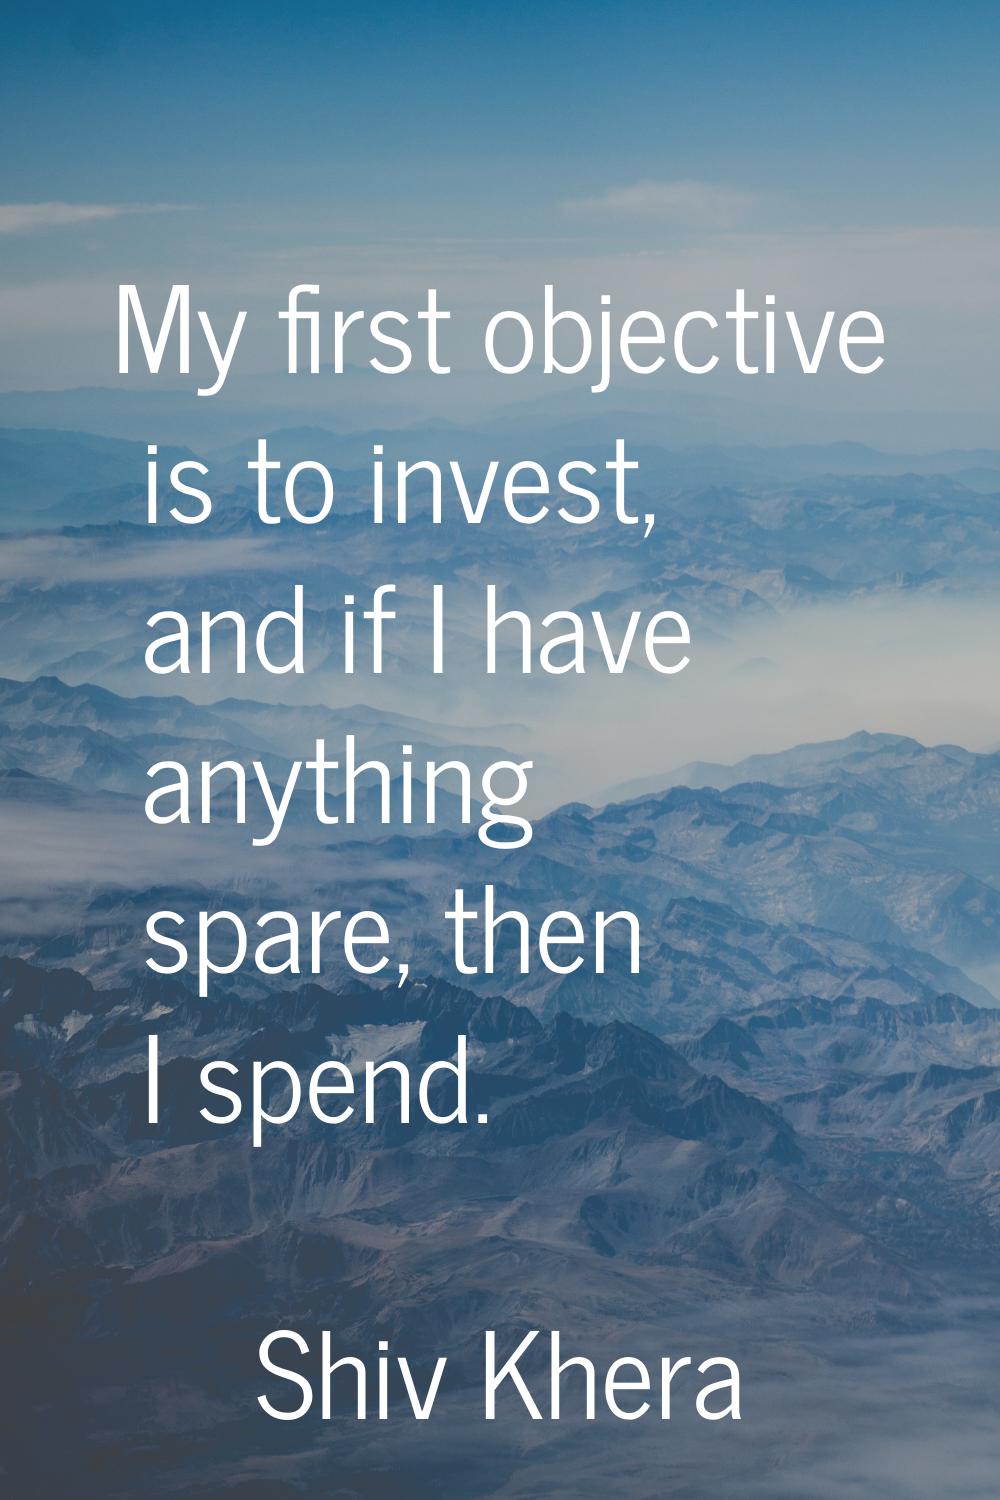 My first objective is to invest, and if I have anything spare, then I spend.